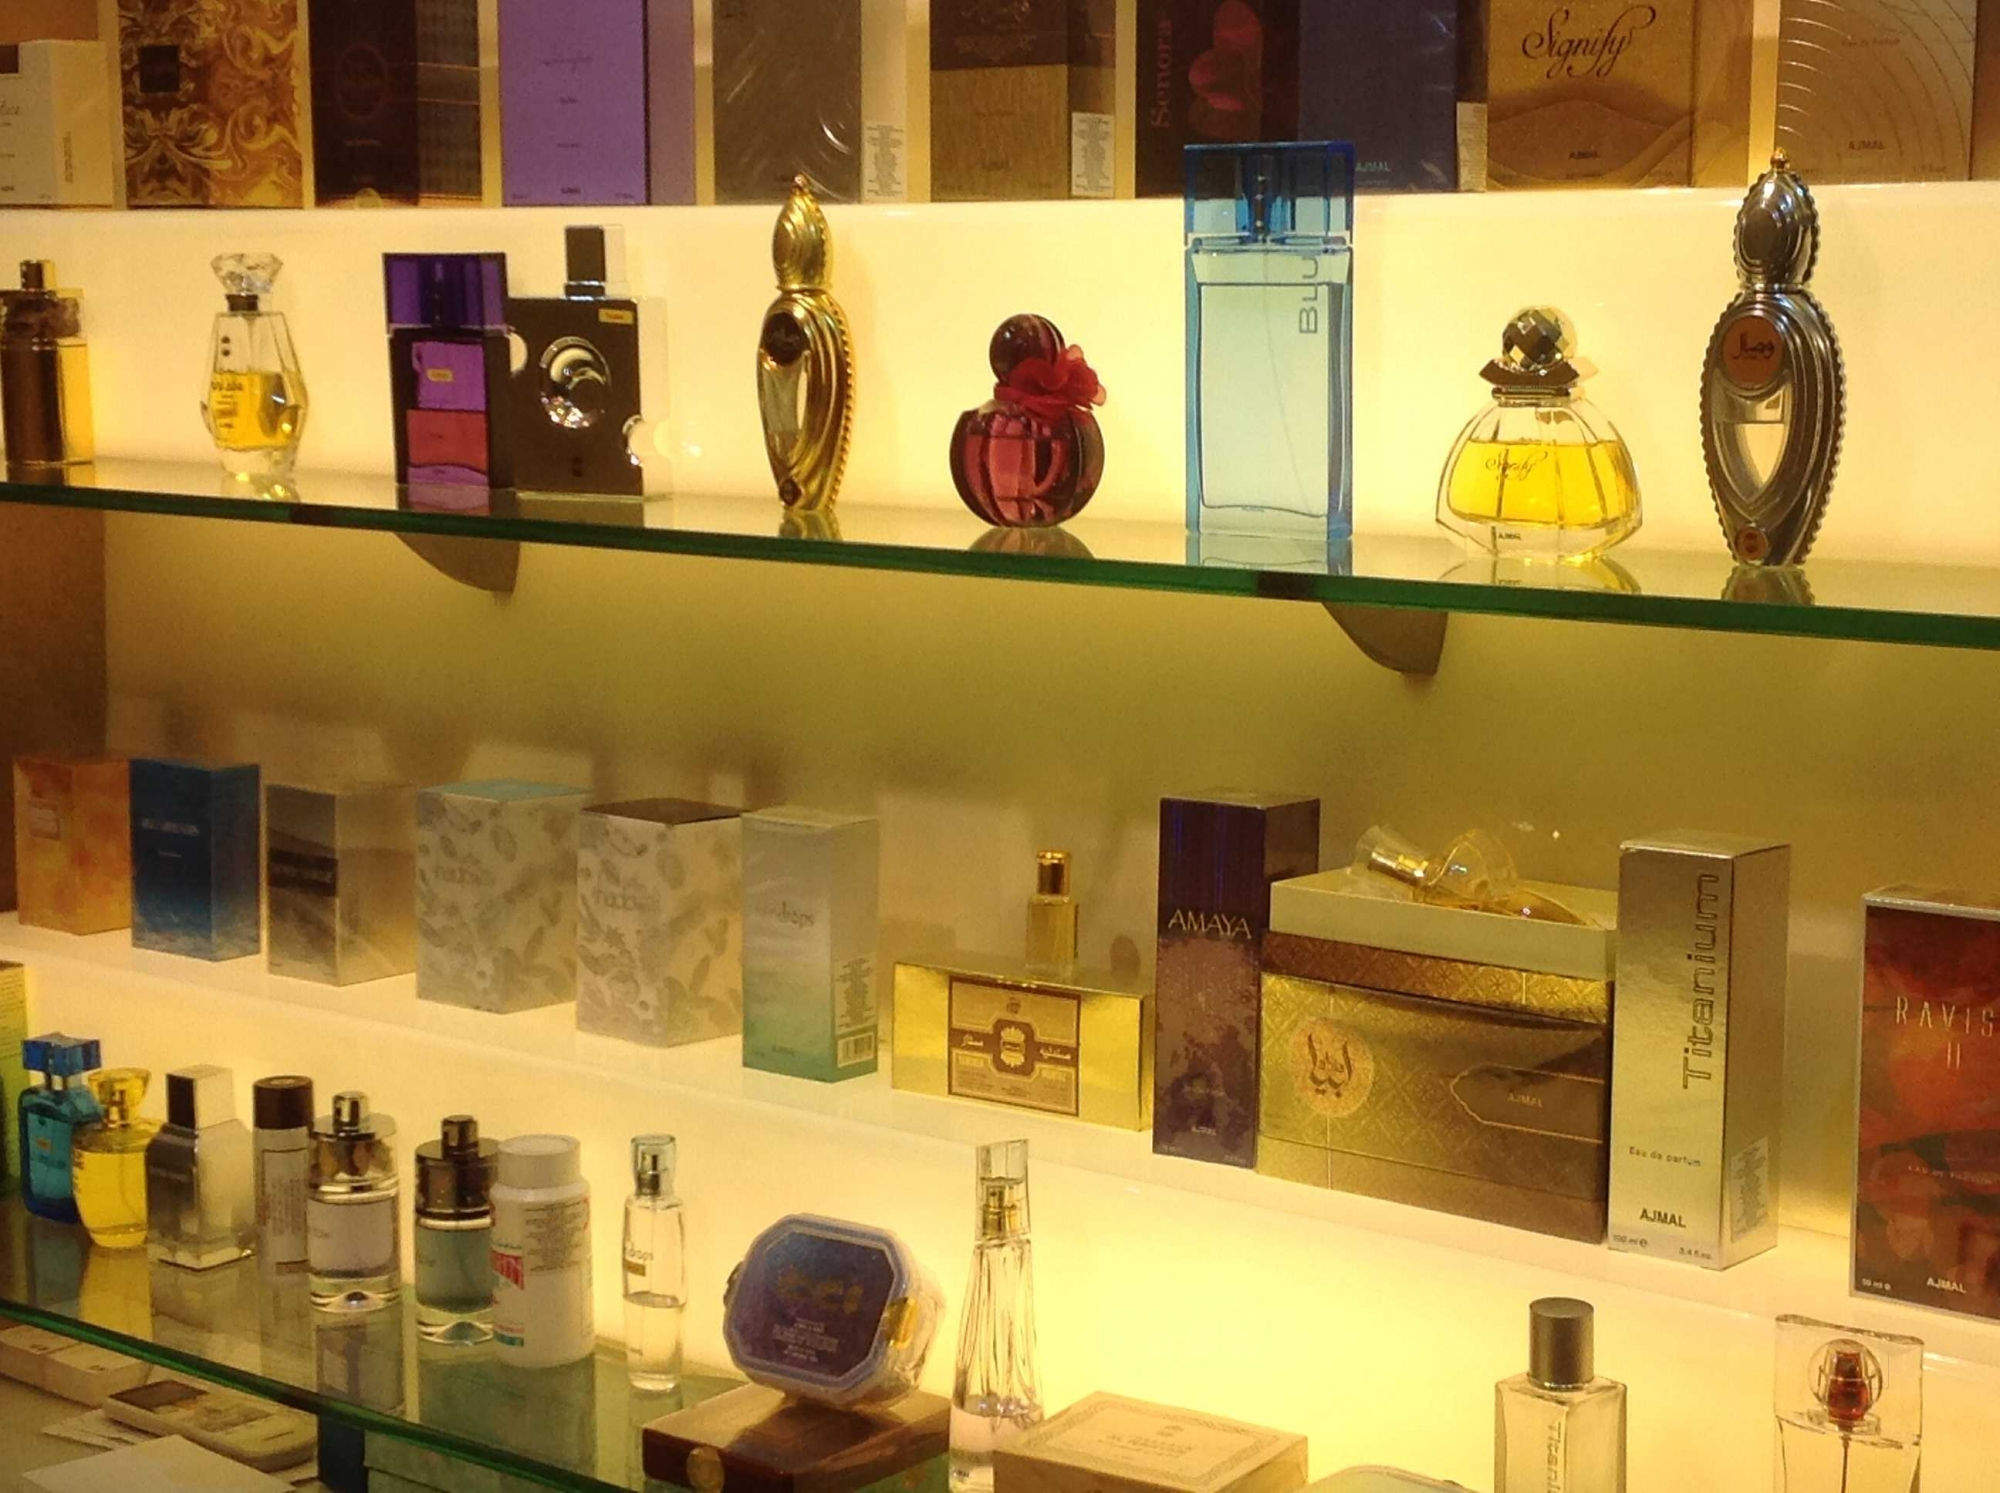 As proud Indians, we want to bring the best to India: Consulting perfumer Abdulla Ajmal